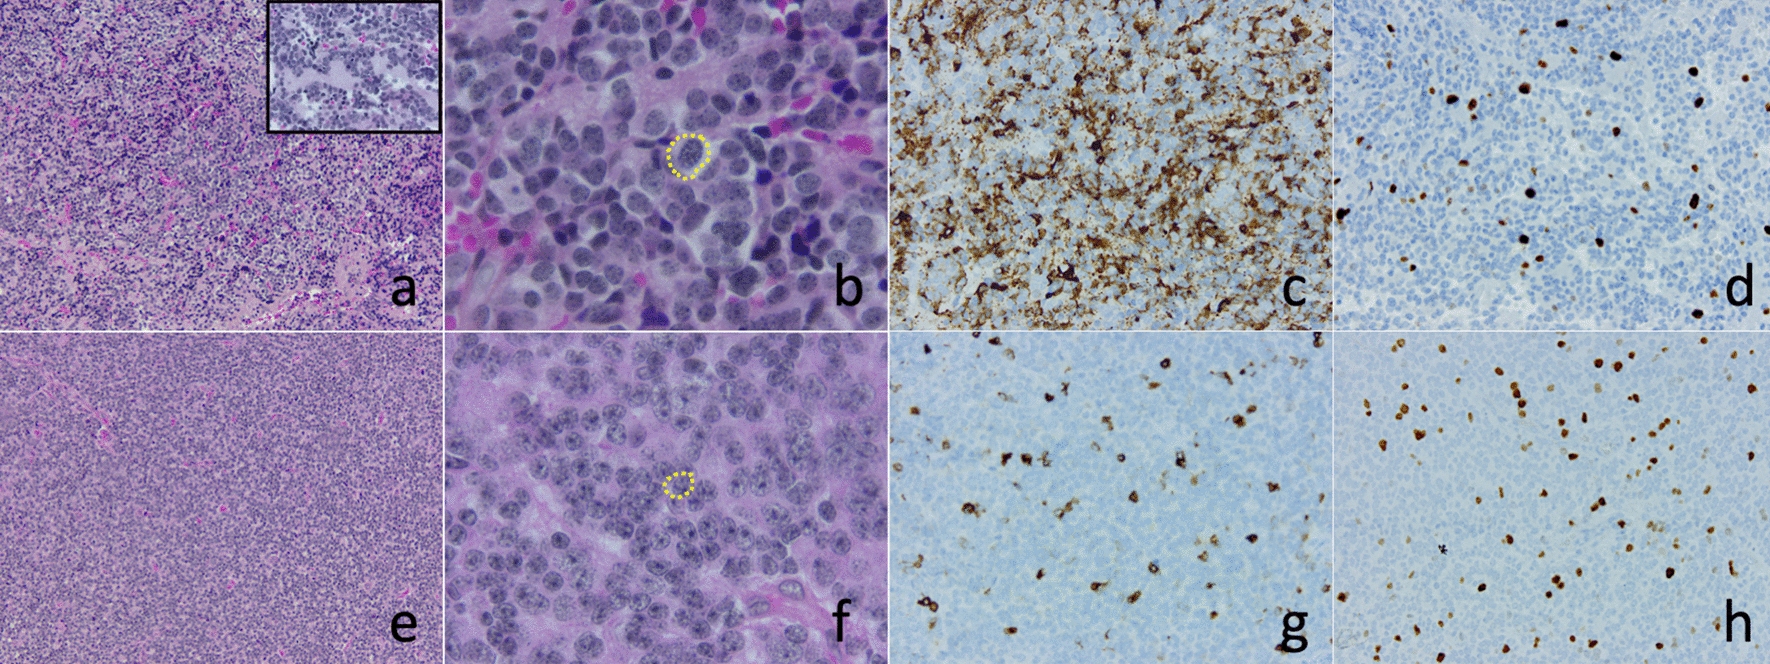 Pineal parenchymal tumors of intermediate differentiation: in need of a stringent definition to avoid confusion. Scientific commentary on ‘Genetical and epigenetical profiling identifies two subgroups of pineal parenchymal tumors of intermediate differentiation (PPTID) with distinct molecular, histological and clinical characteristics’